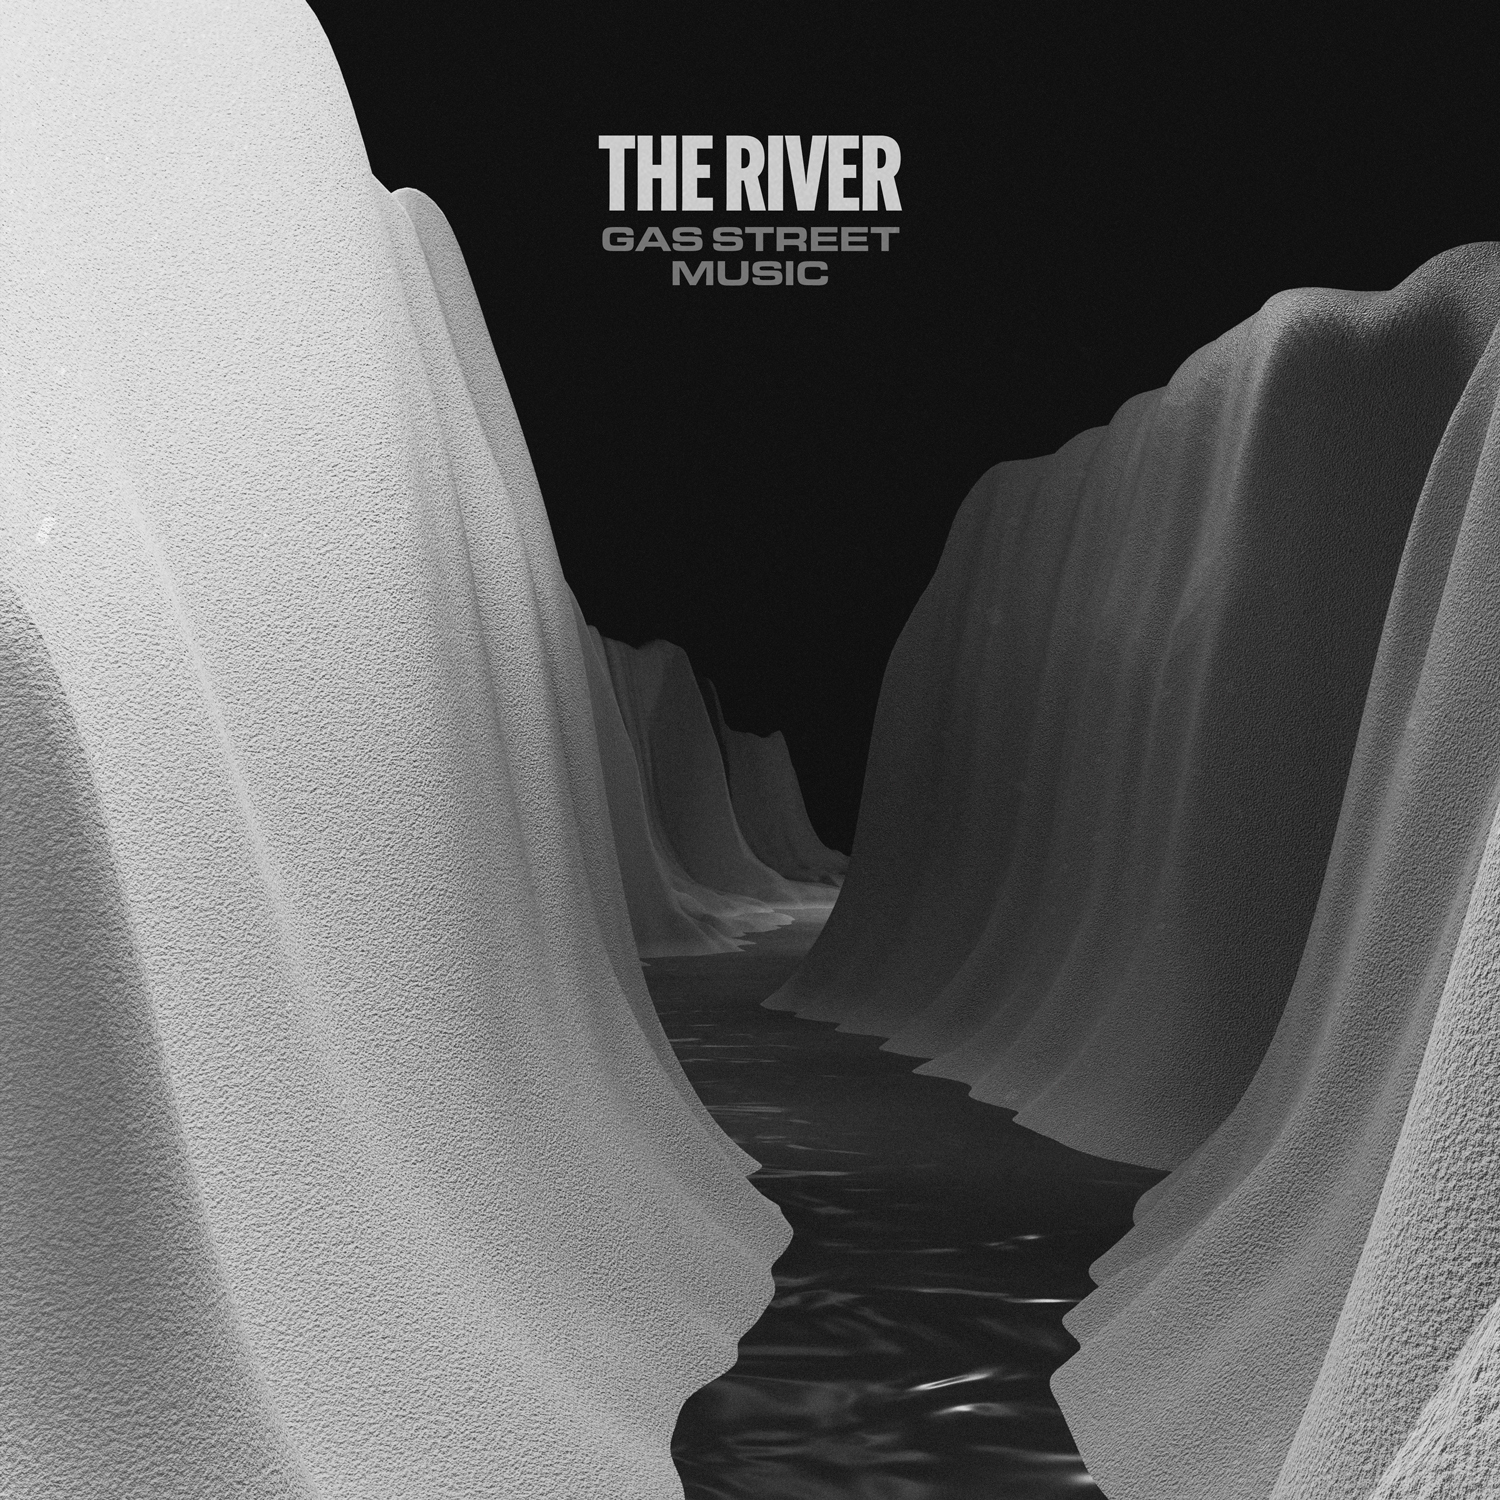 Gas Street Music - The River